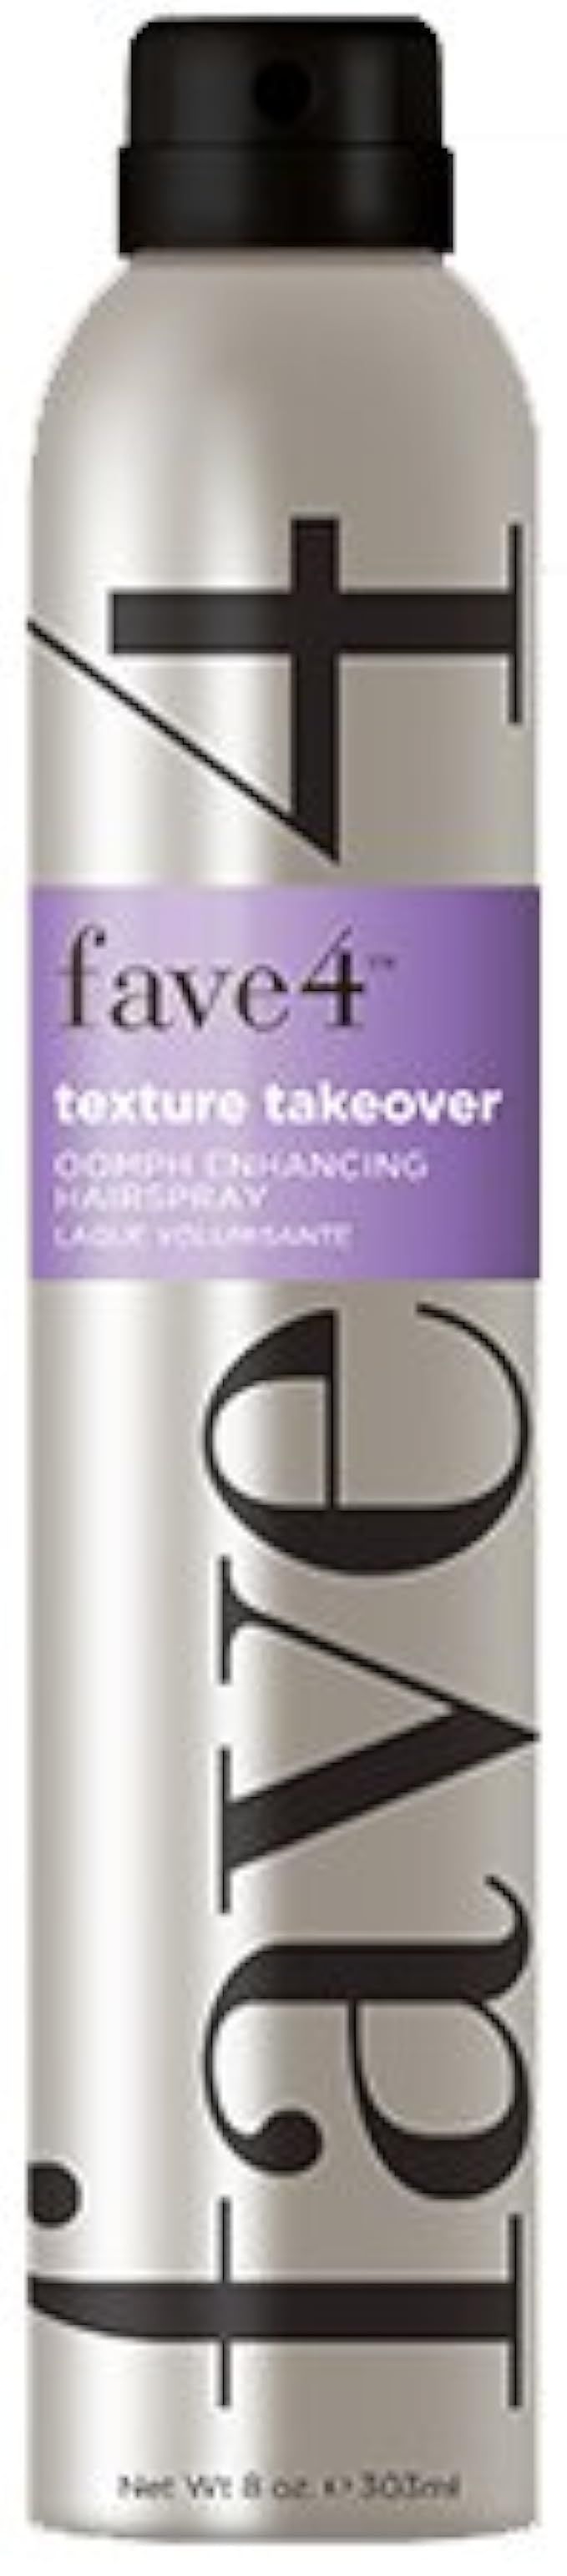 Fave4 Texture Takeover Oomph Enhancing Hairspray 8 oz | Amazon (US)